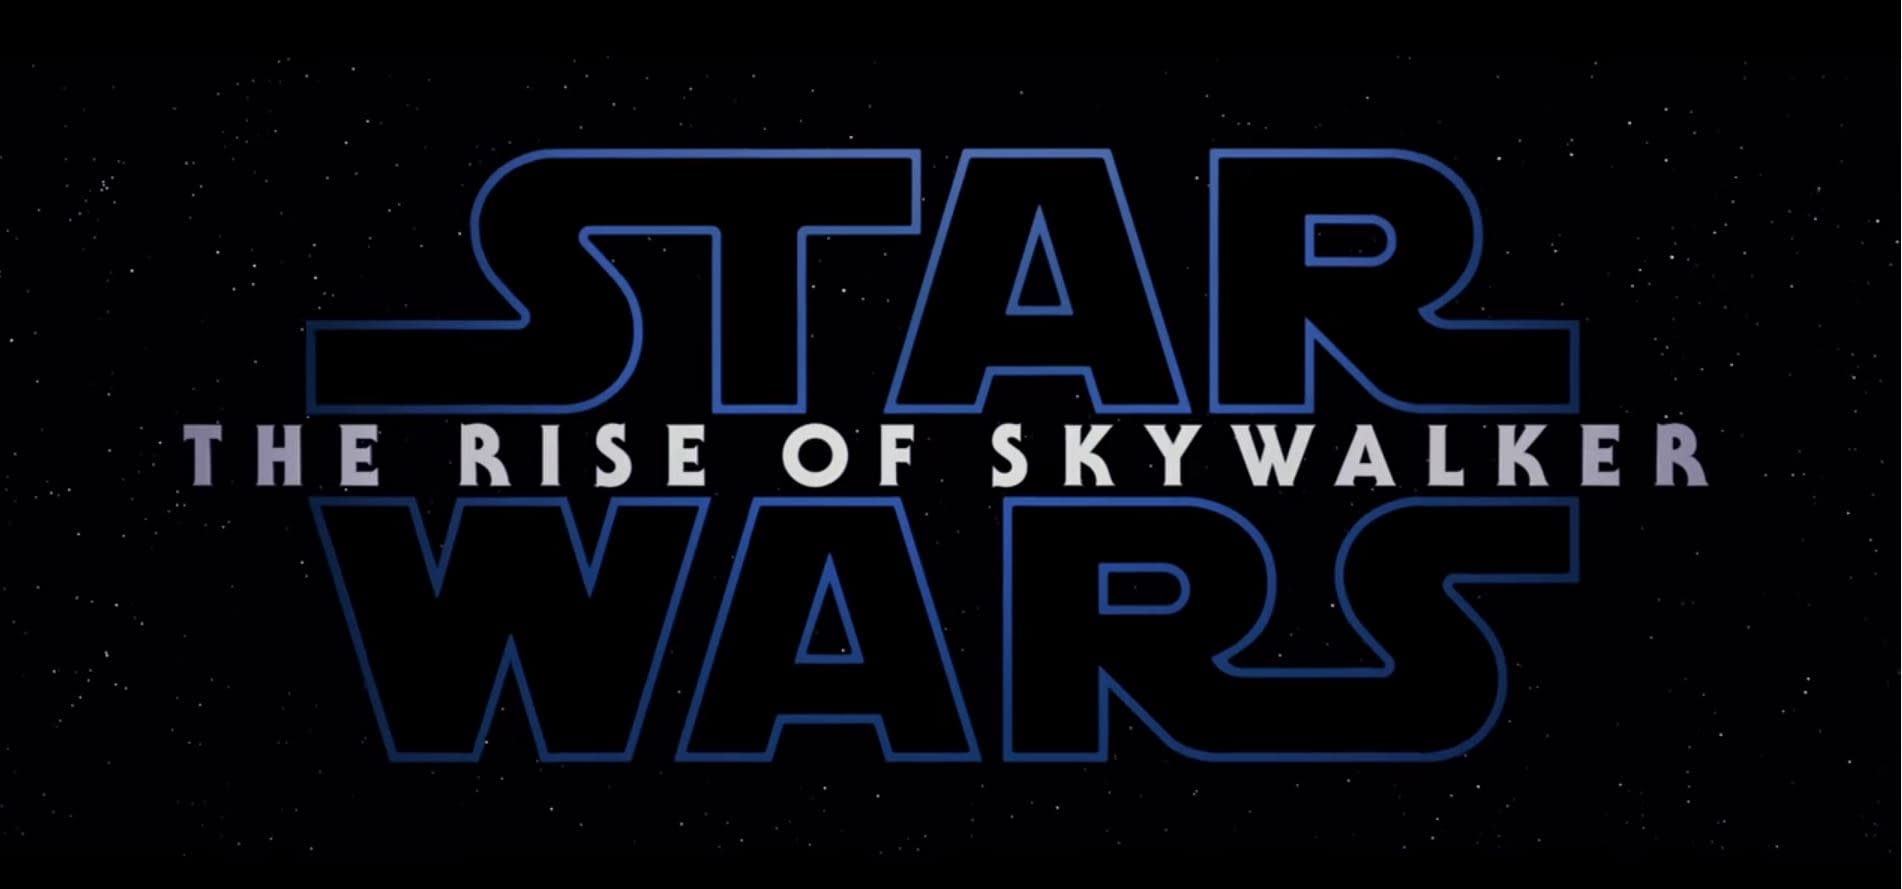 "Star Wars: The Rise of Skywalker" Sets a Dec. 16th Premiere, Run Time is Revealed